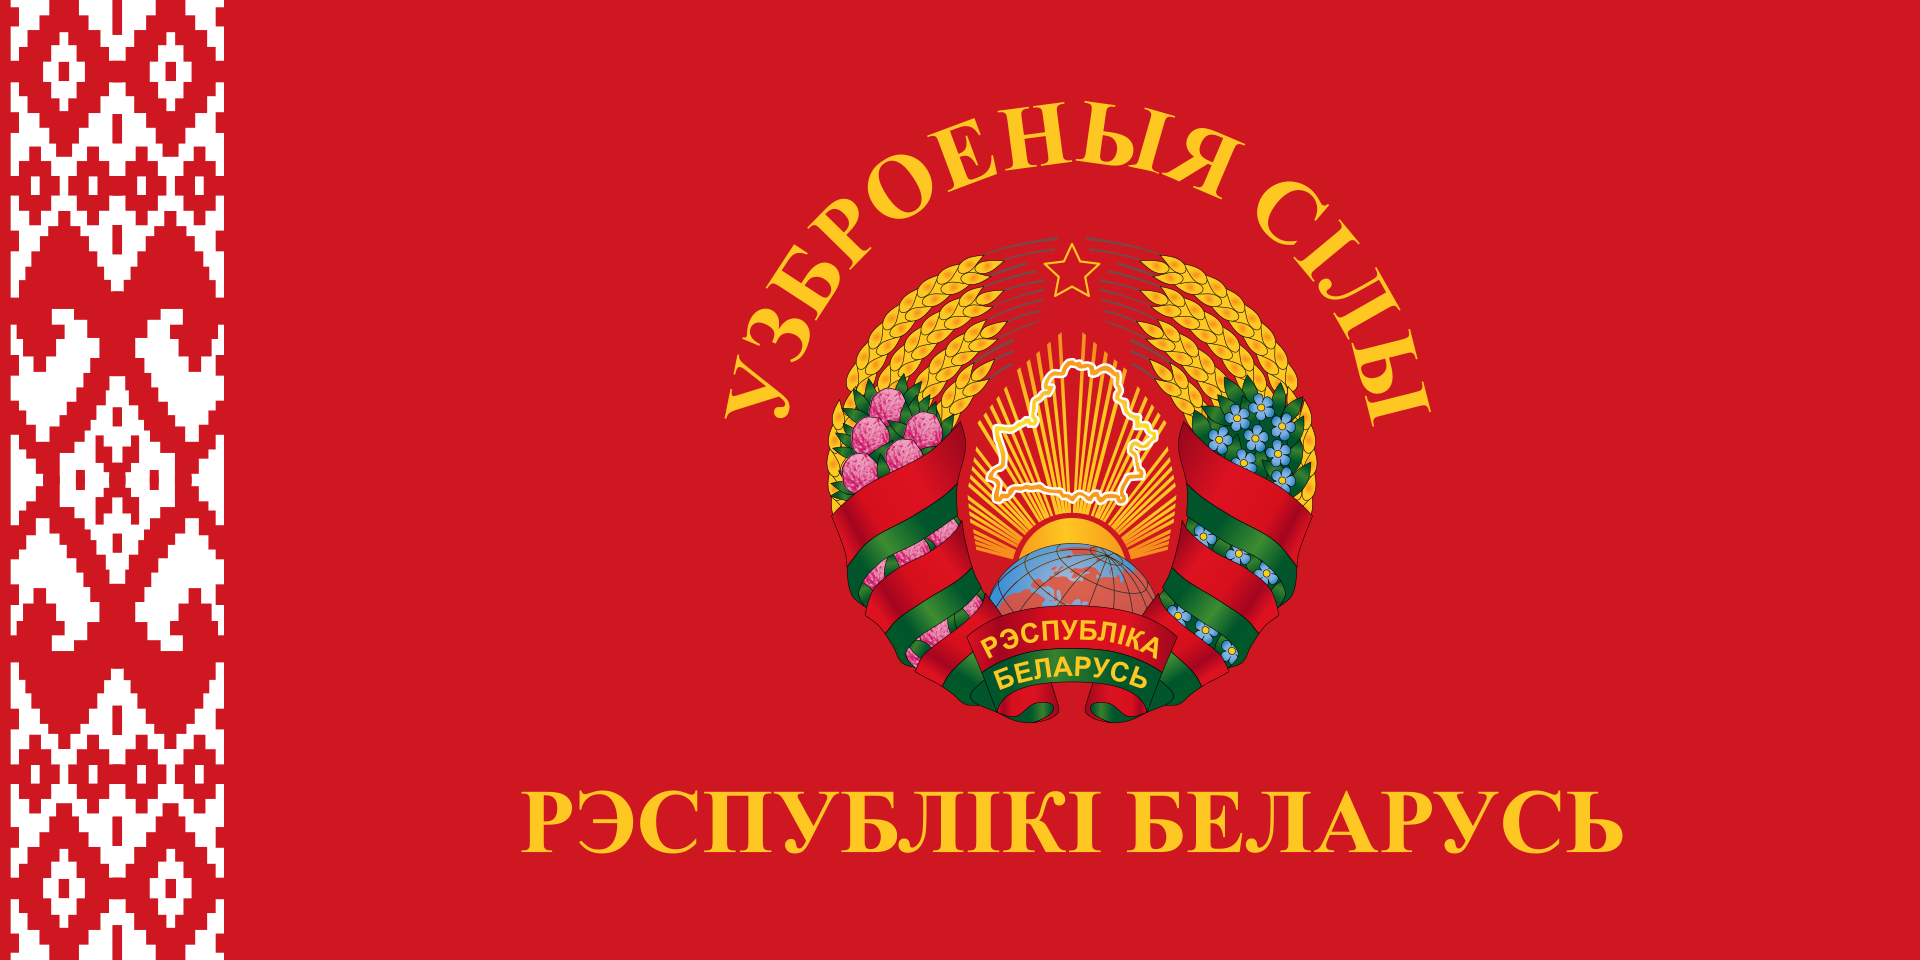 https://upload.wikimedia.org/wikipedia/commons/thumb/8/89/Flag_of_the_Armed_Forces_of_Belarus.svg/1920px-Flag_of_the_Armed_Forces_of_Belarus.svg.png